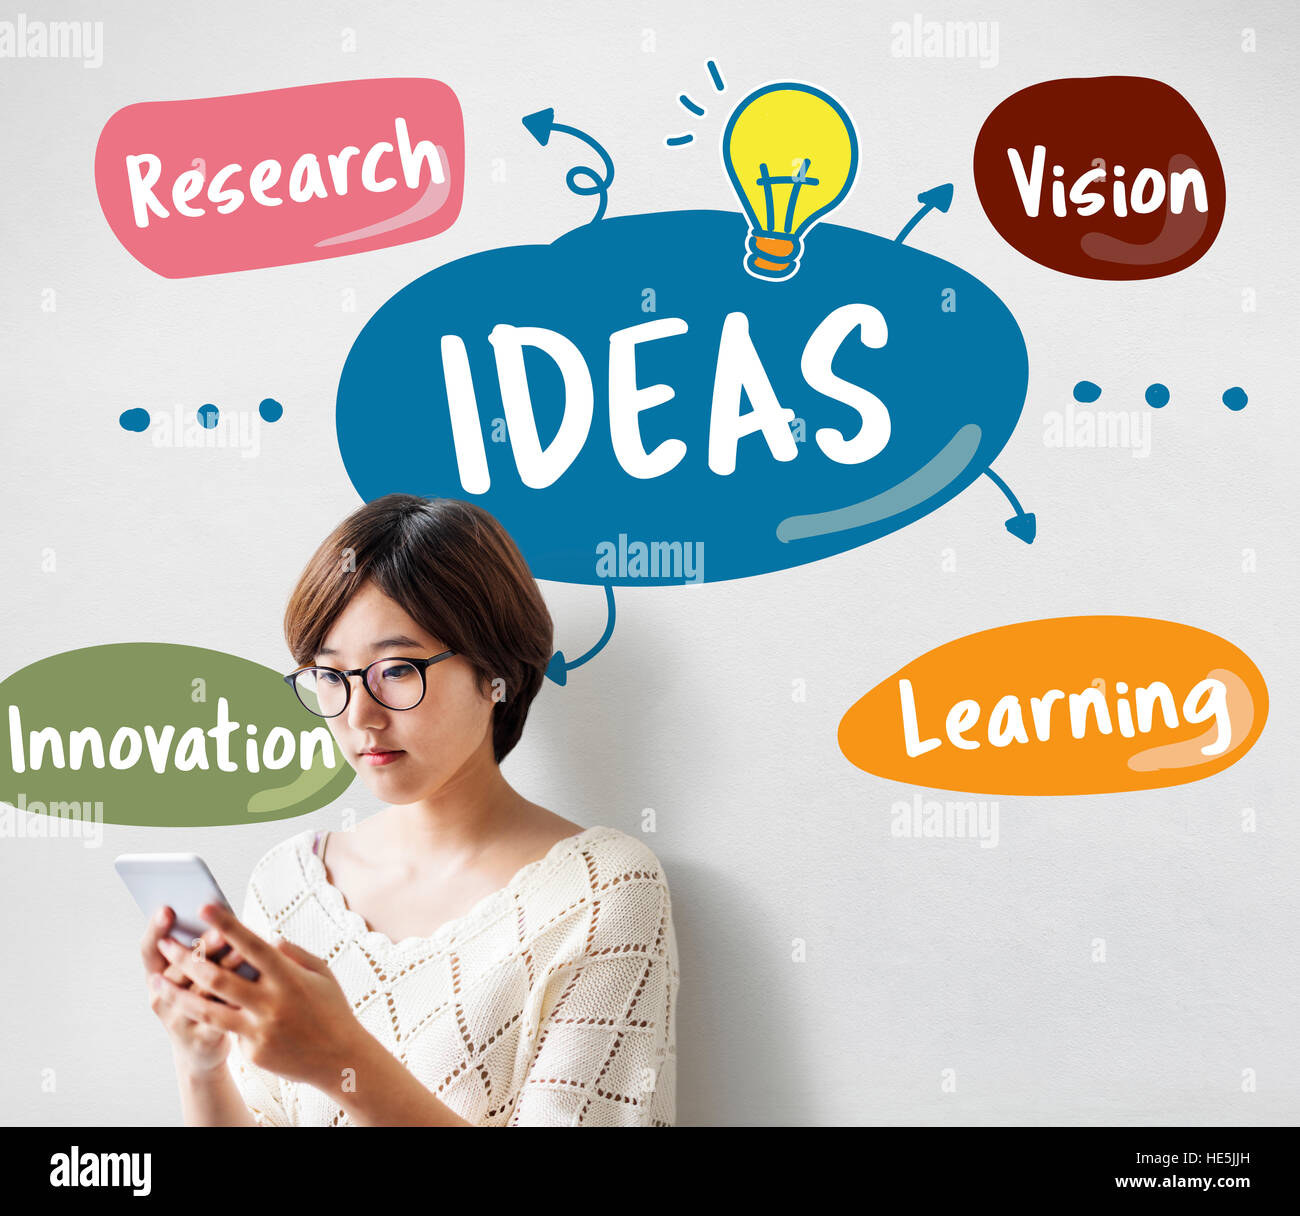 Ideas Vision Research Innovation Concept Stock Photo